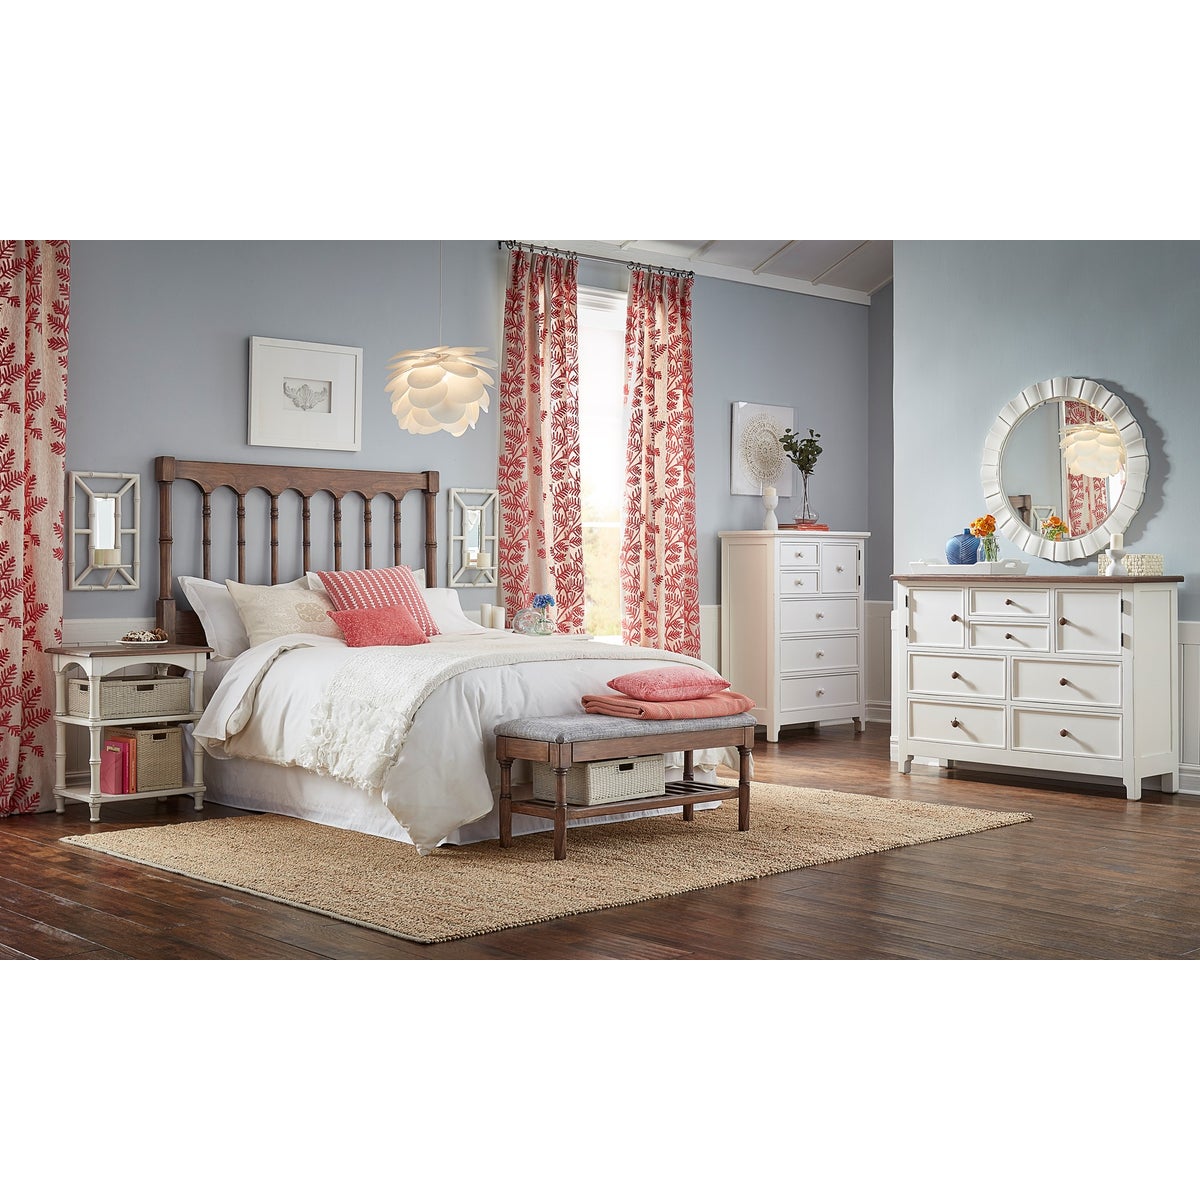 ISLAND SPINDLE QUEEN HEADBOARD - NVY